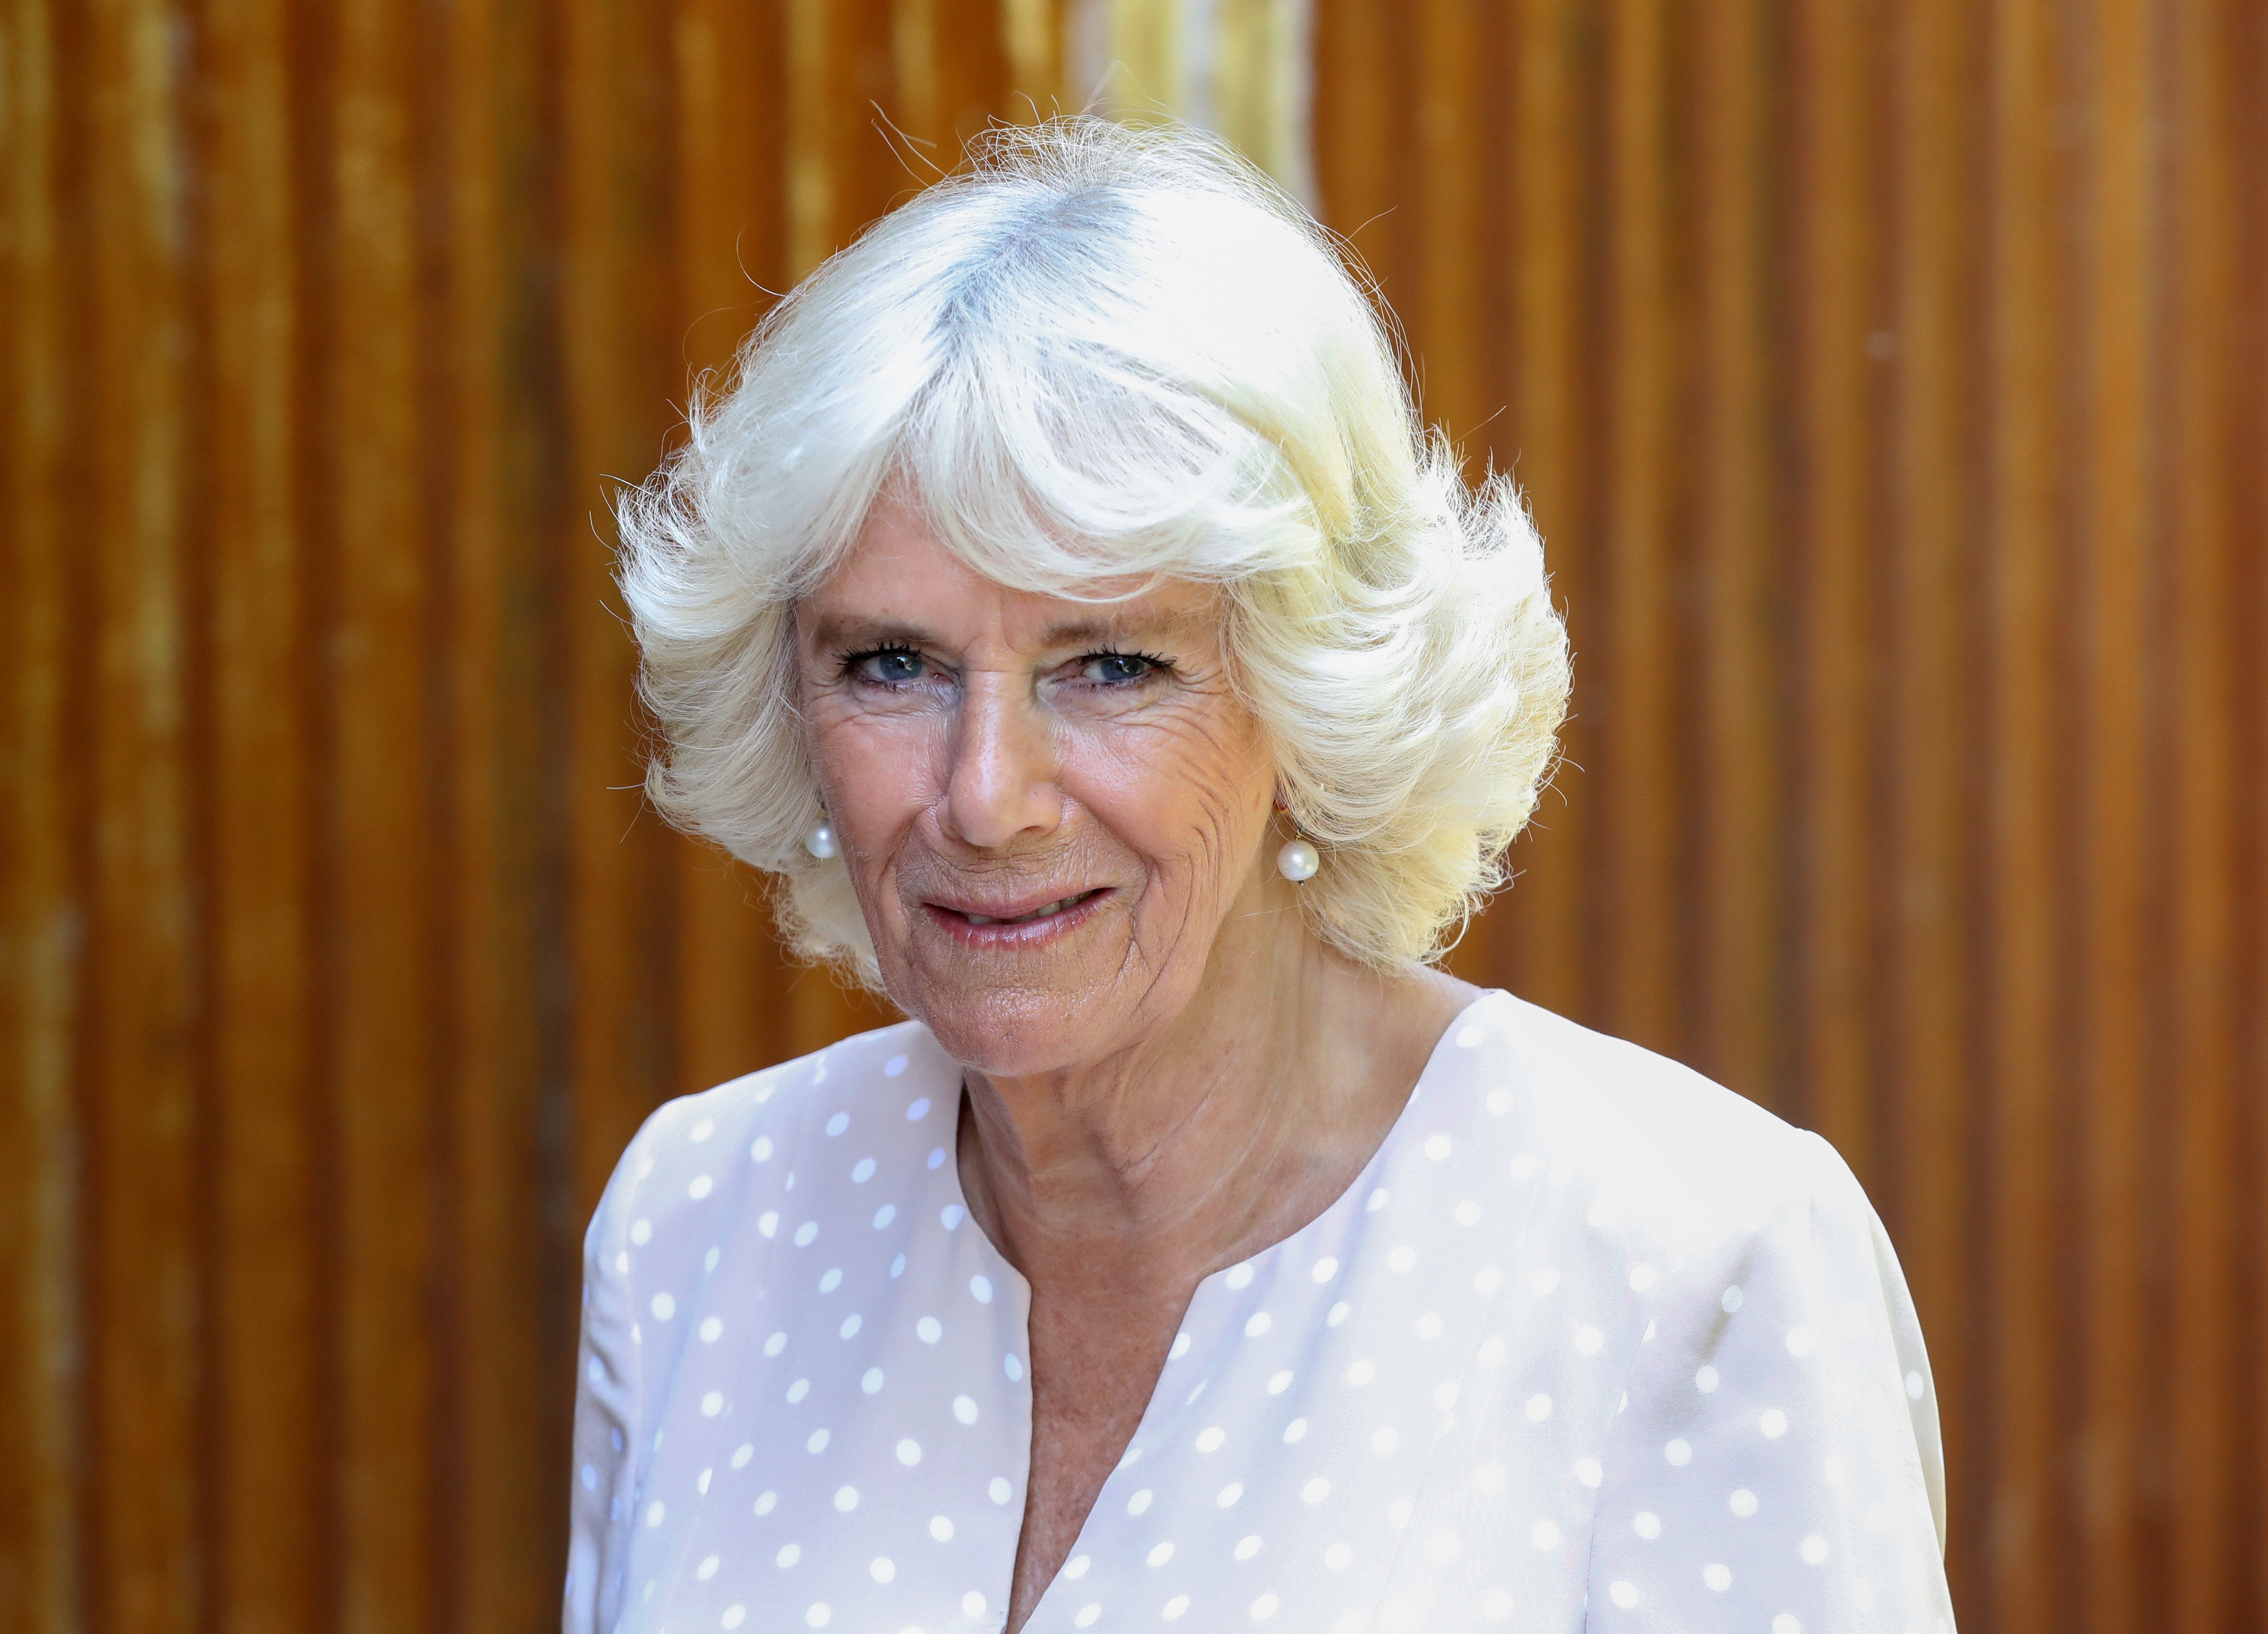  Camilla Parker Bowles | photo : Getty Images